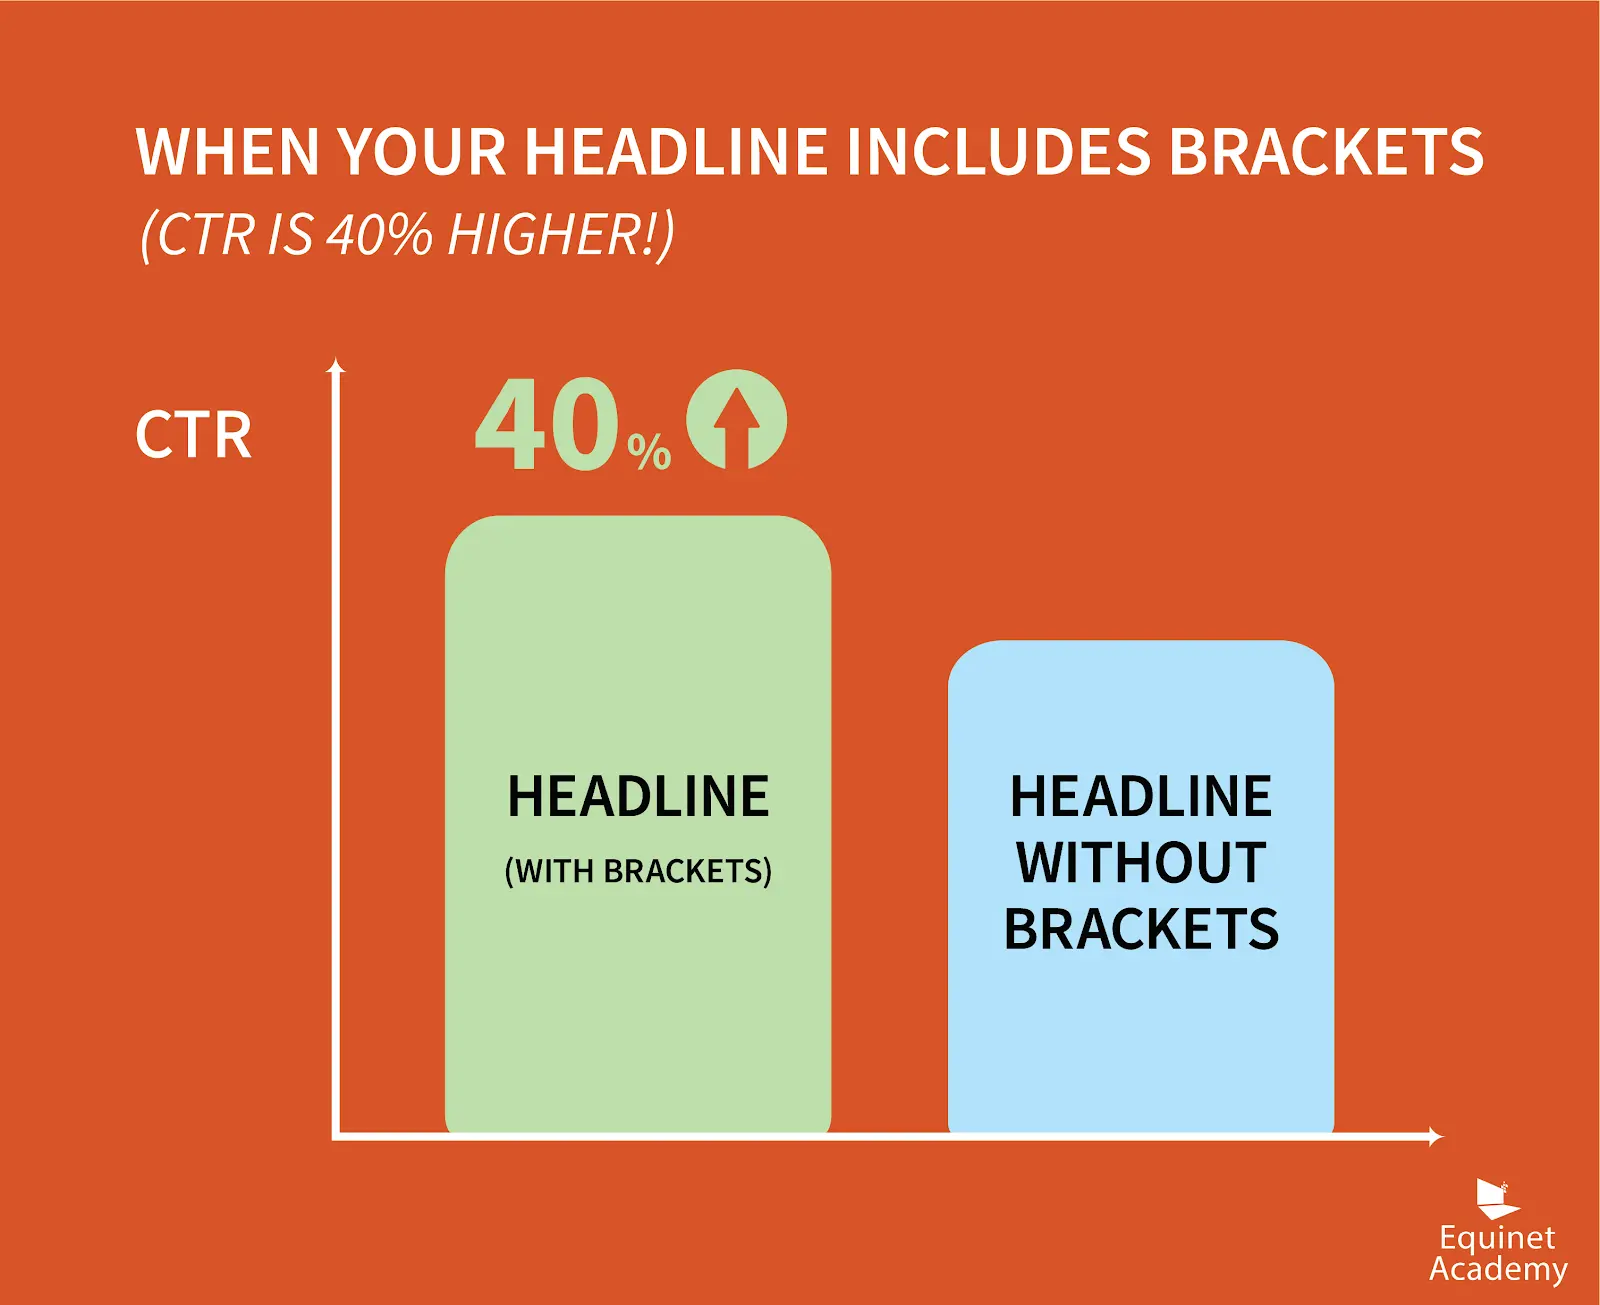 statistic-of-headlines-with-brackets